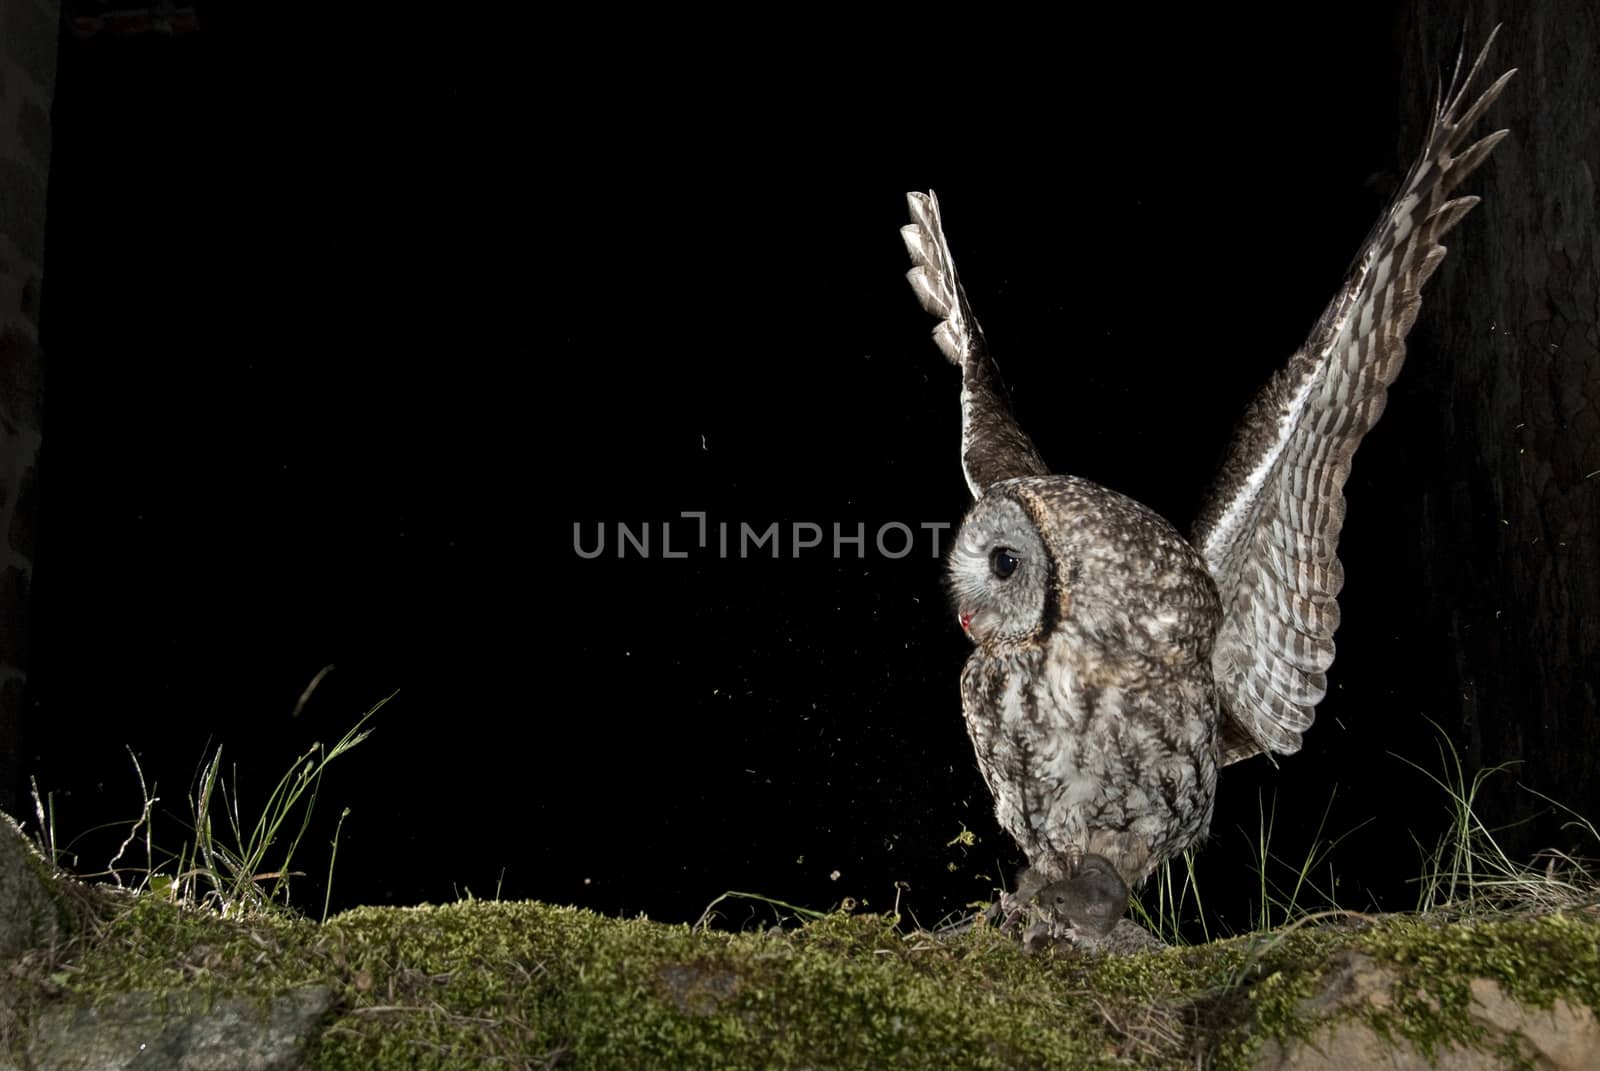 A Tawny owl, hunting mouse, rural environment, flying